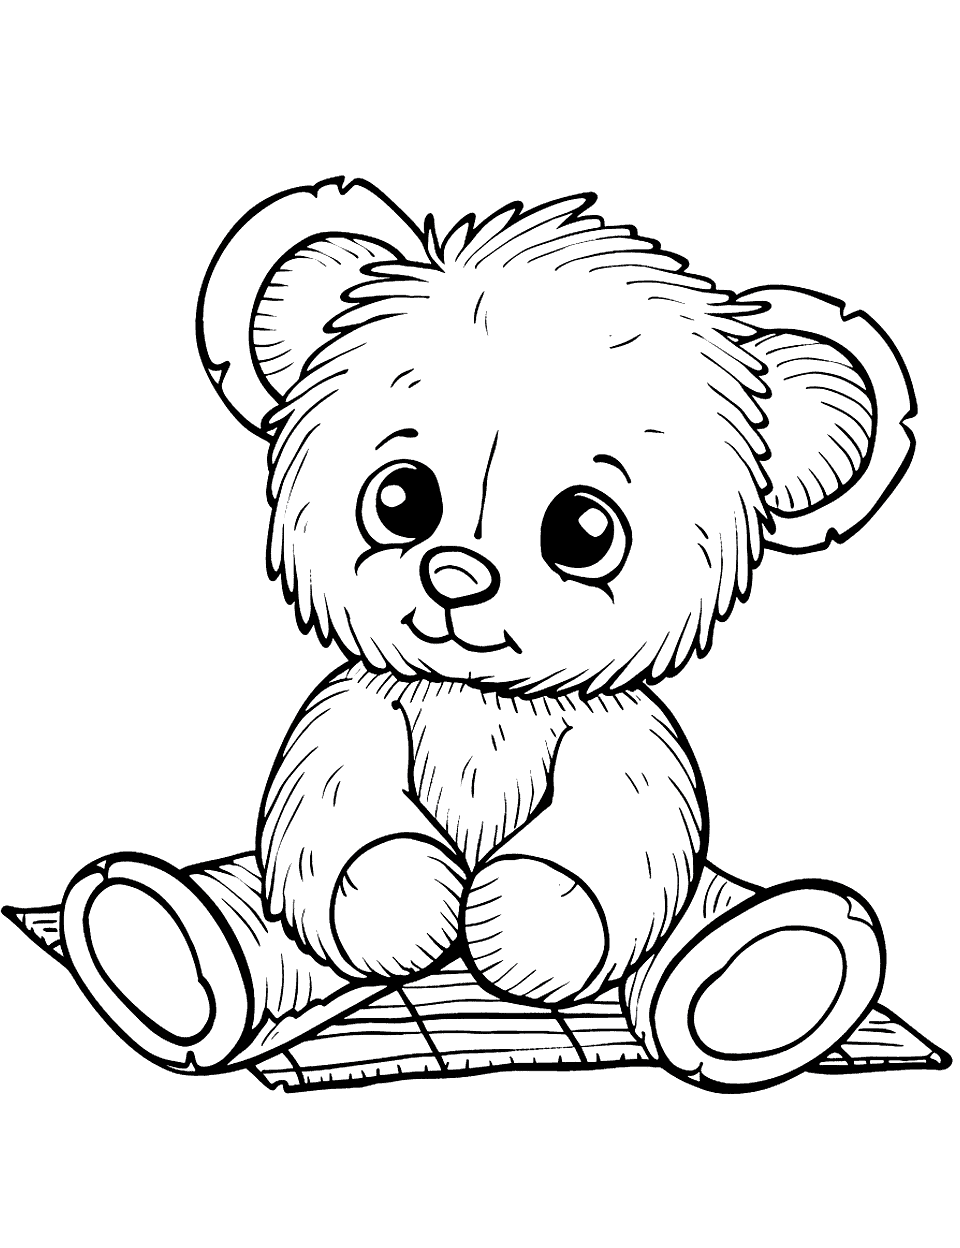 Teddy Bear Picnic Toddler Coloring Page - A teddy bear sitting on a picnic blanket.